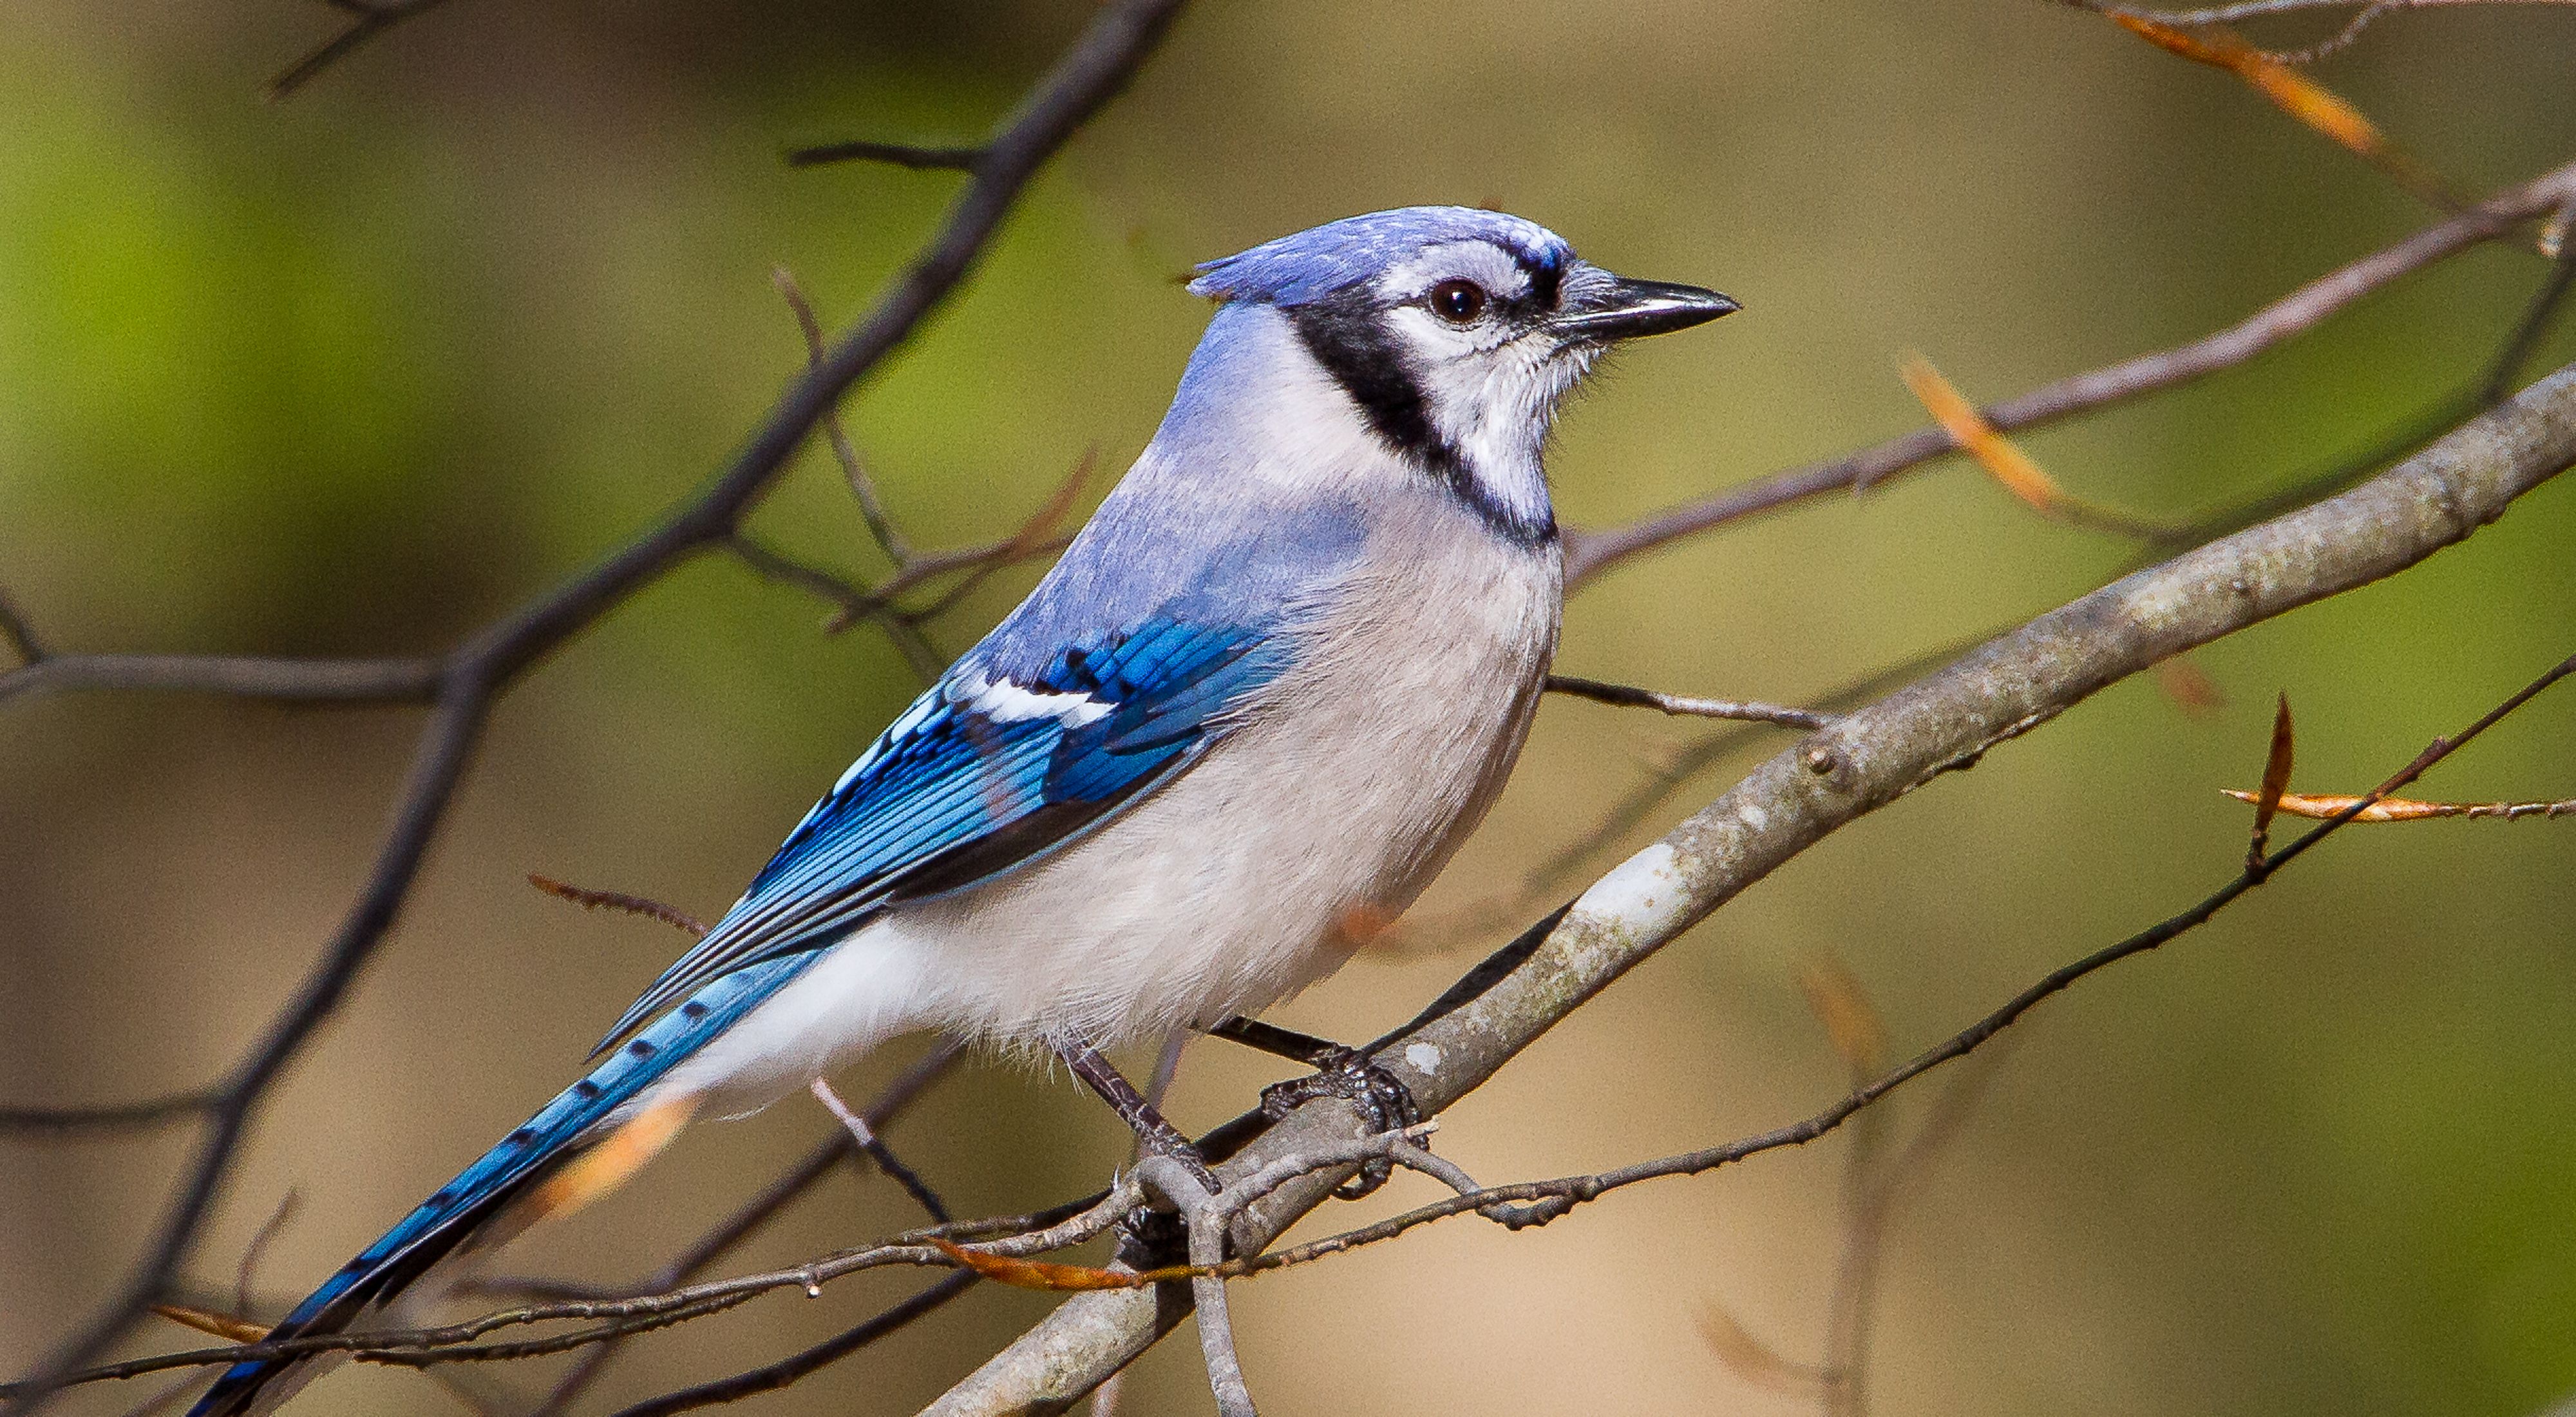 An adult blue jay perched on a small branch.